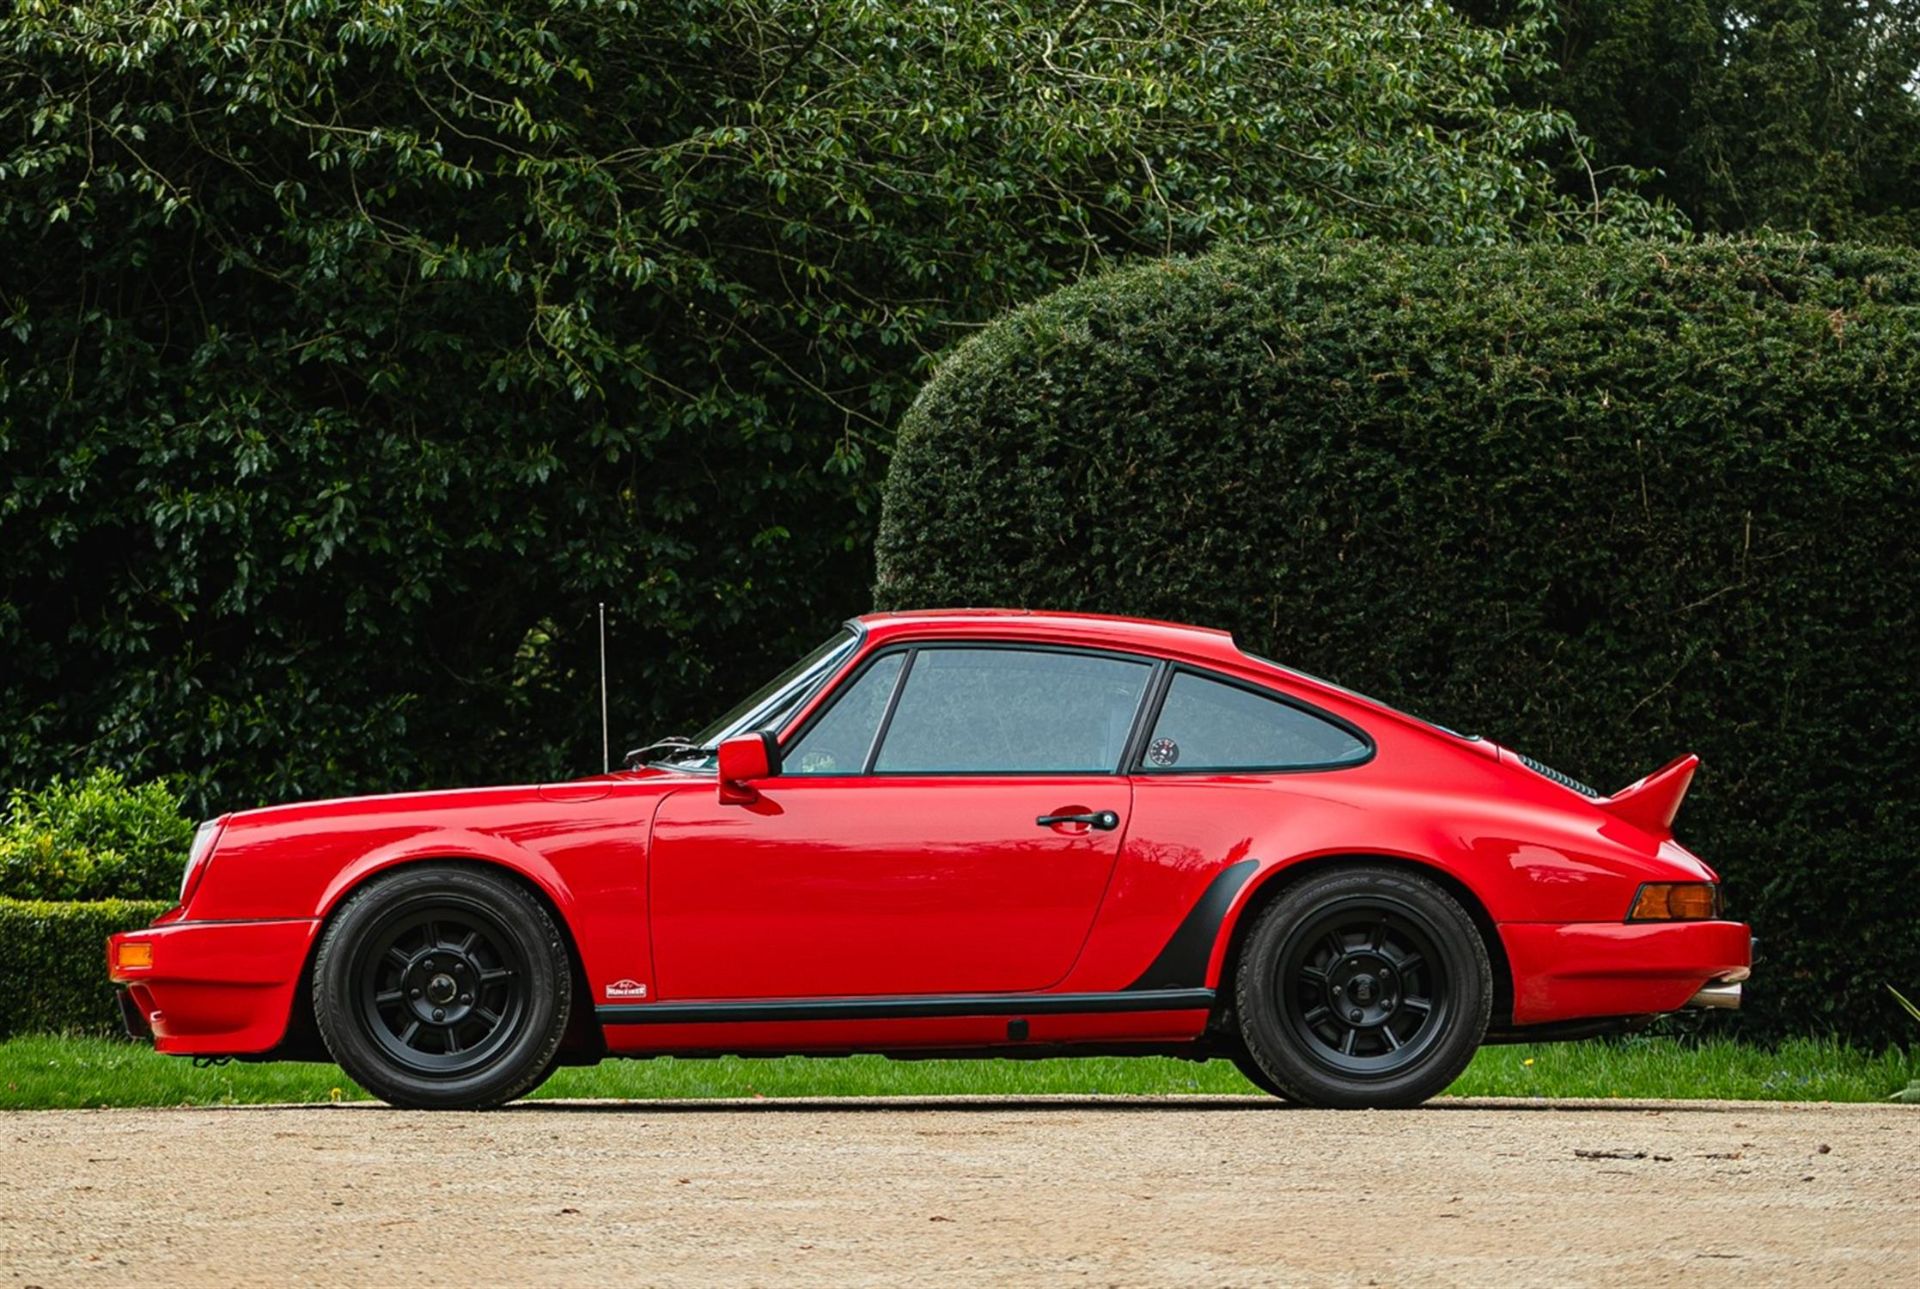 **Sold Pre-Sale**1982 Porsche 911 SC Restomod - Offered Directly From Mike Brewer - Image 5 of 10